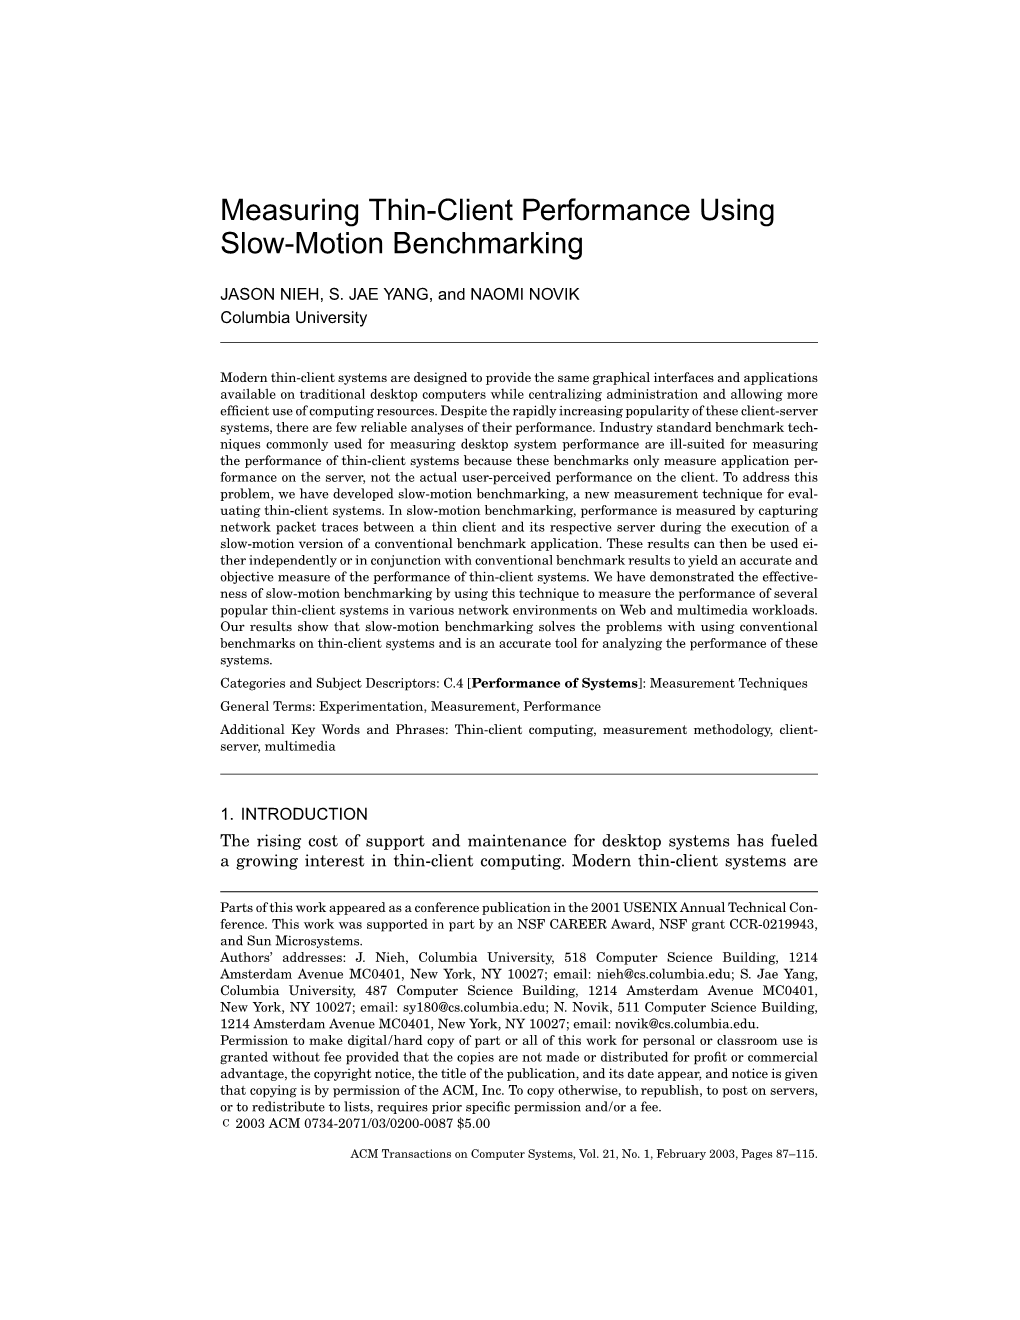 Measuring Thin-Client Performance Using Slow-Motion Benchmarking